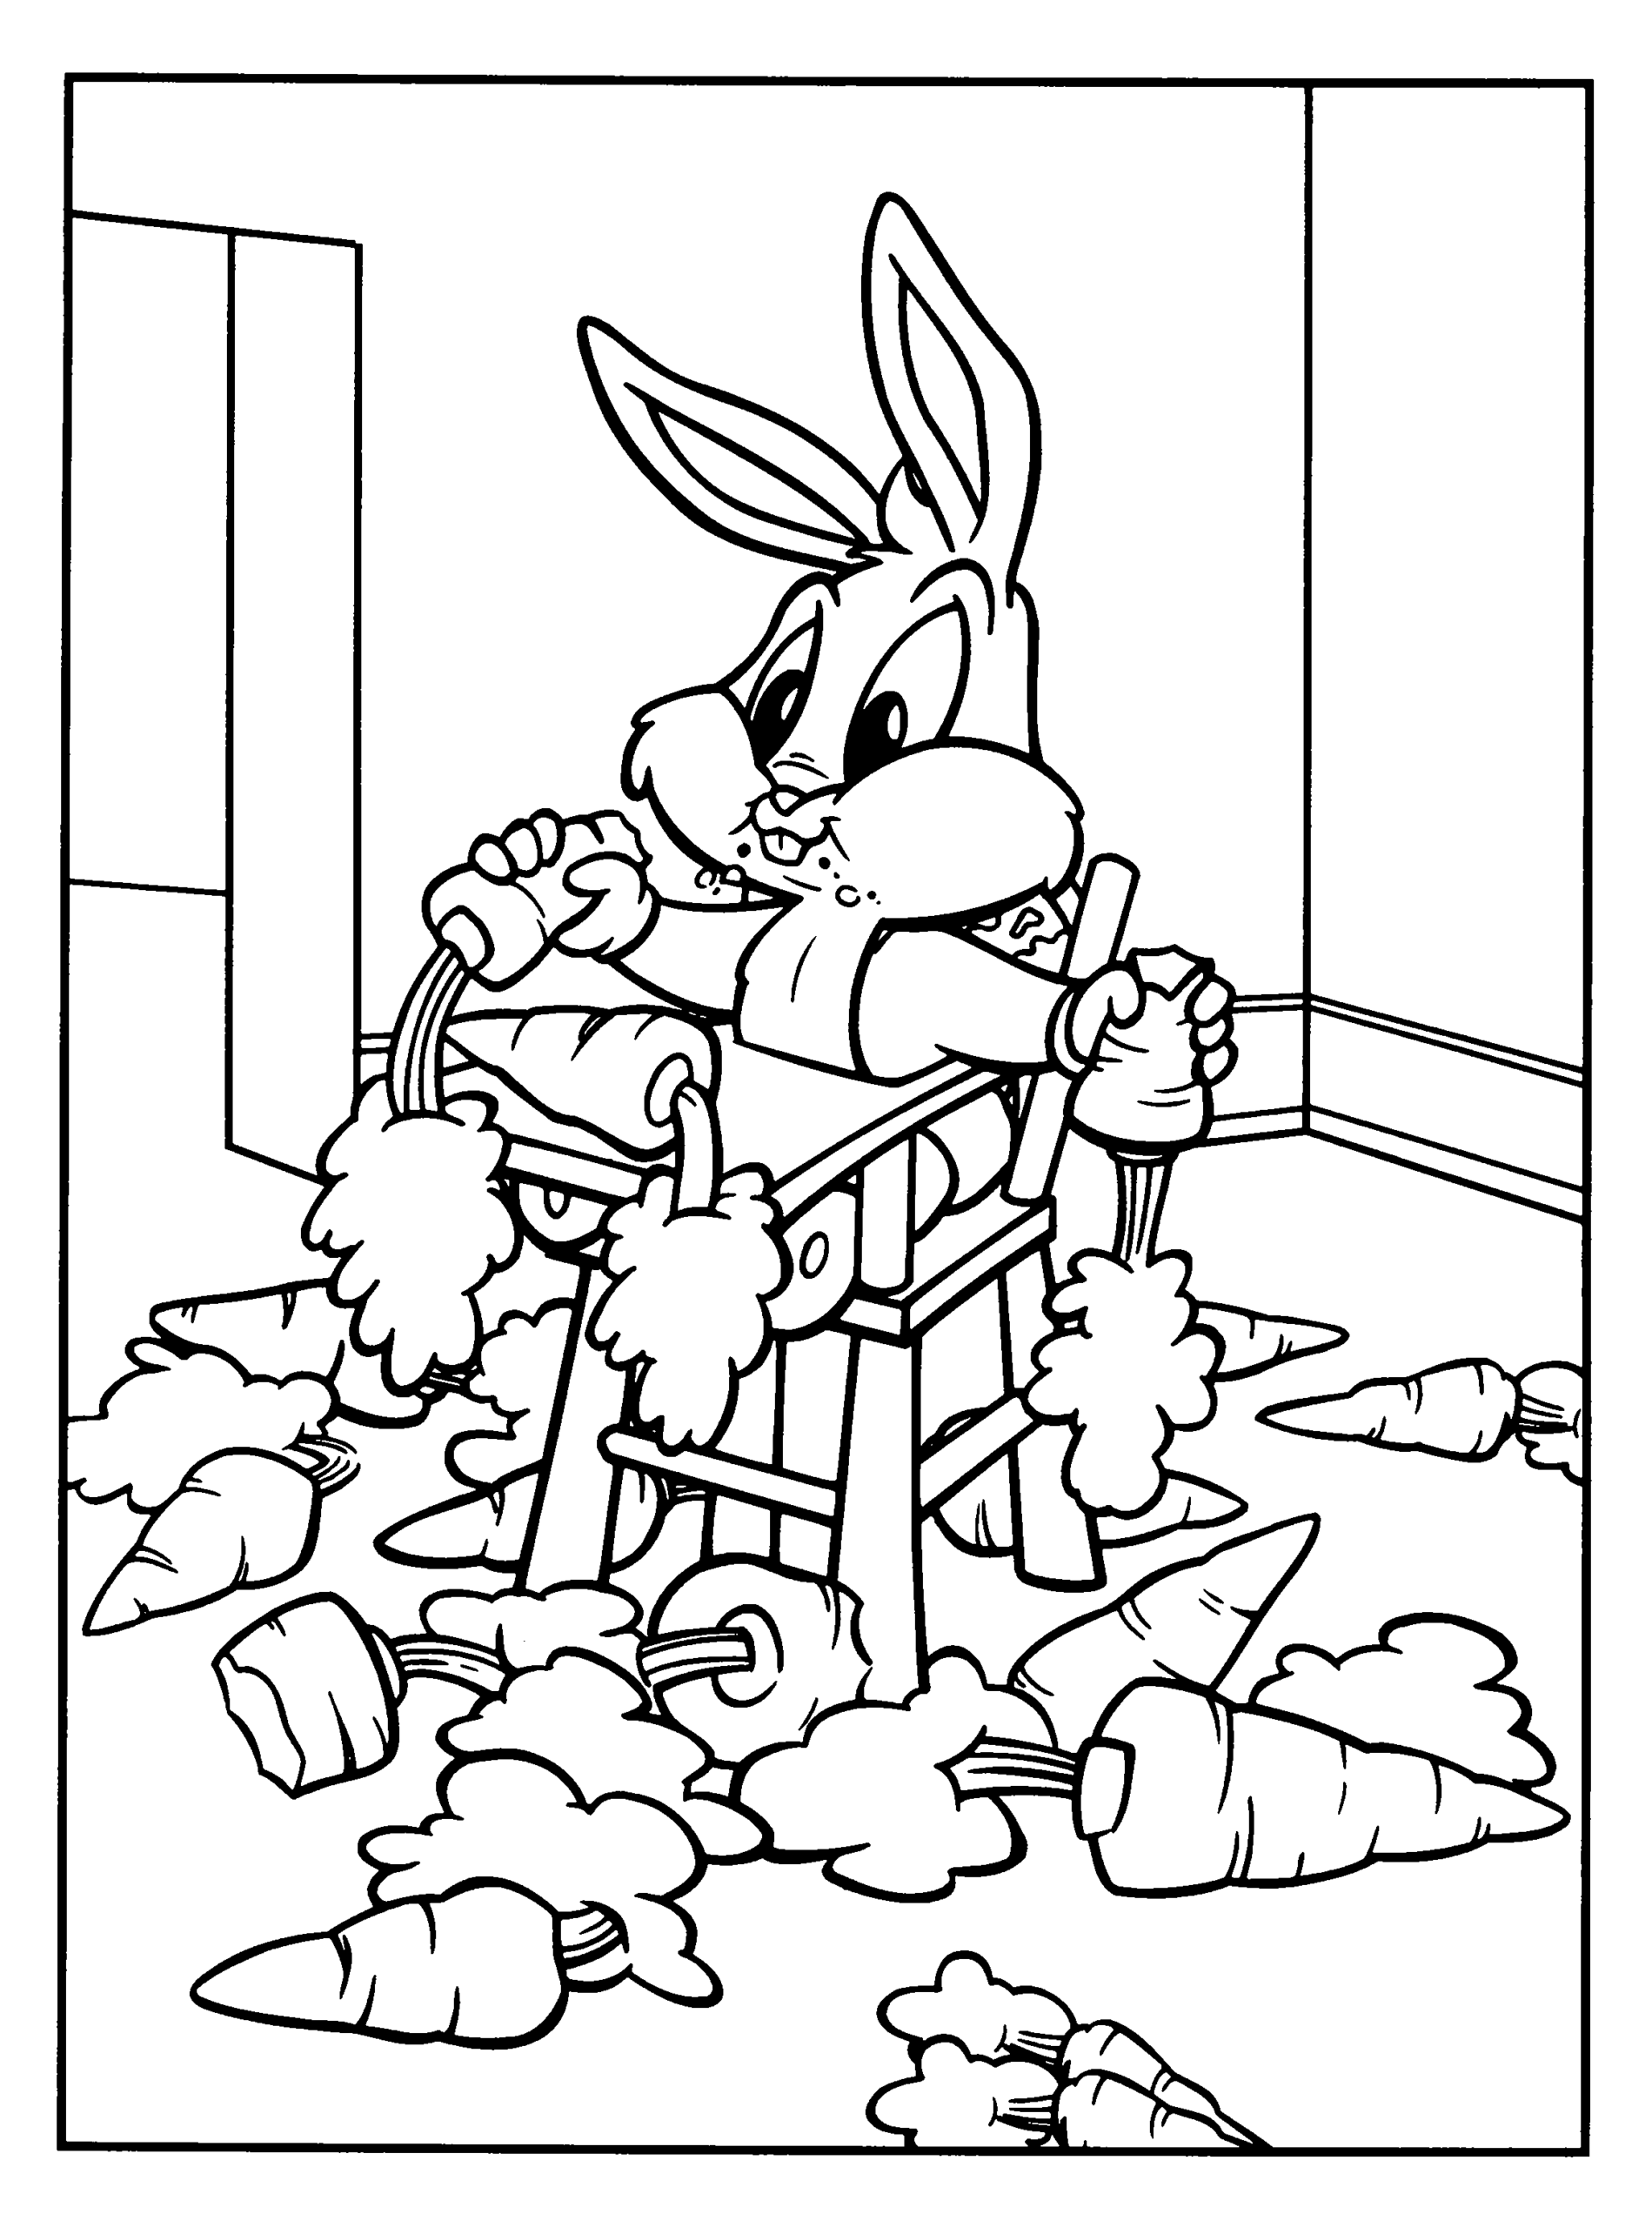 Baby Looney Tunes Coloring Pages TV Film baby looney tunes 3 Printable 2020 00445 Coloring4free